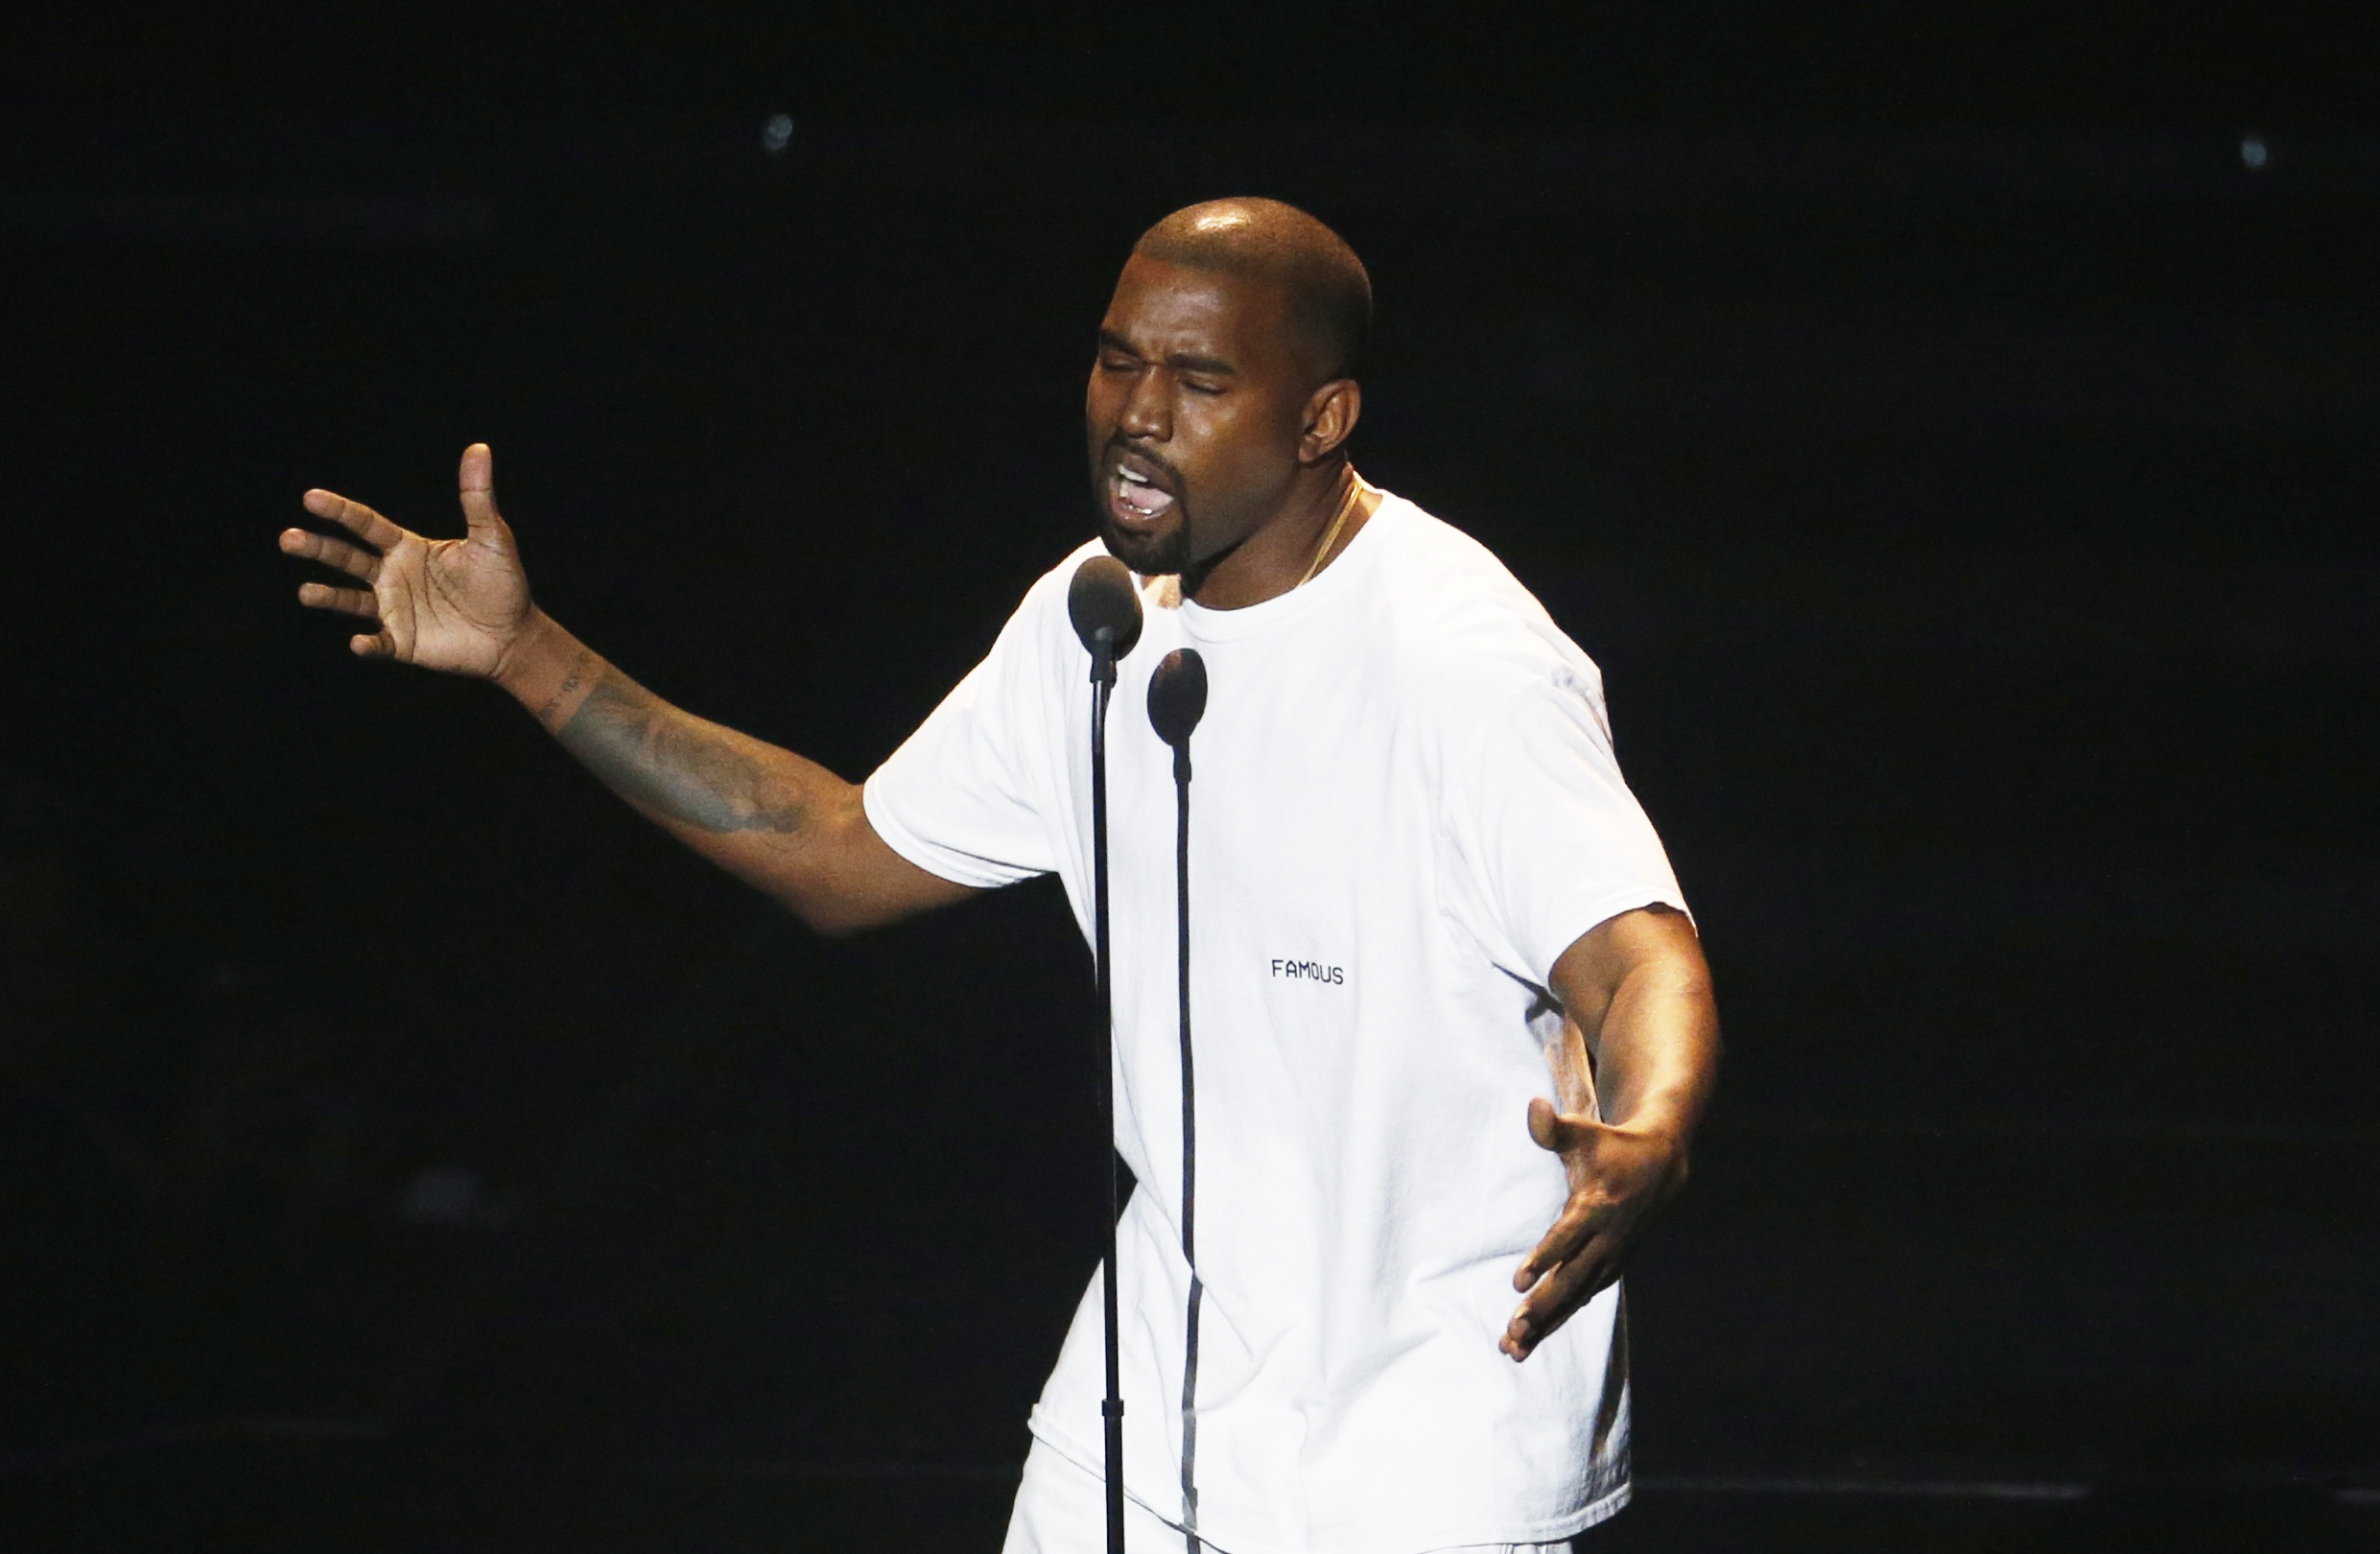 Kanye West on stage during the 2016 MTV Video Music Awards in New York, U.S., August 28, 2016.  REUTERS/Lucas Jackson/File Photo